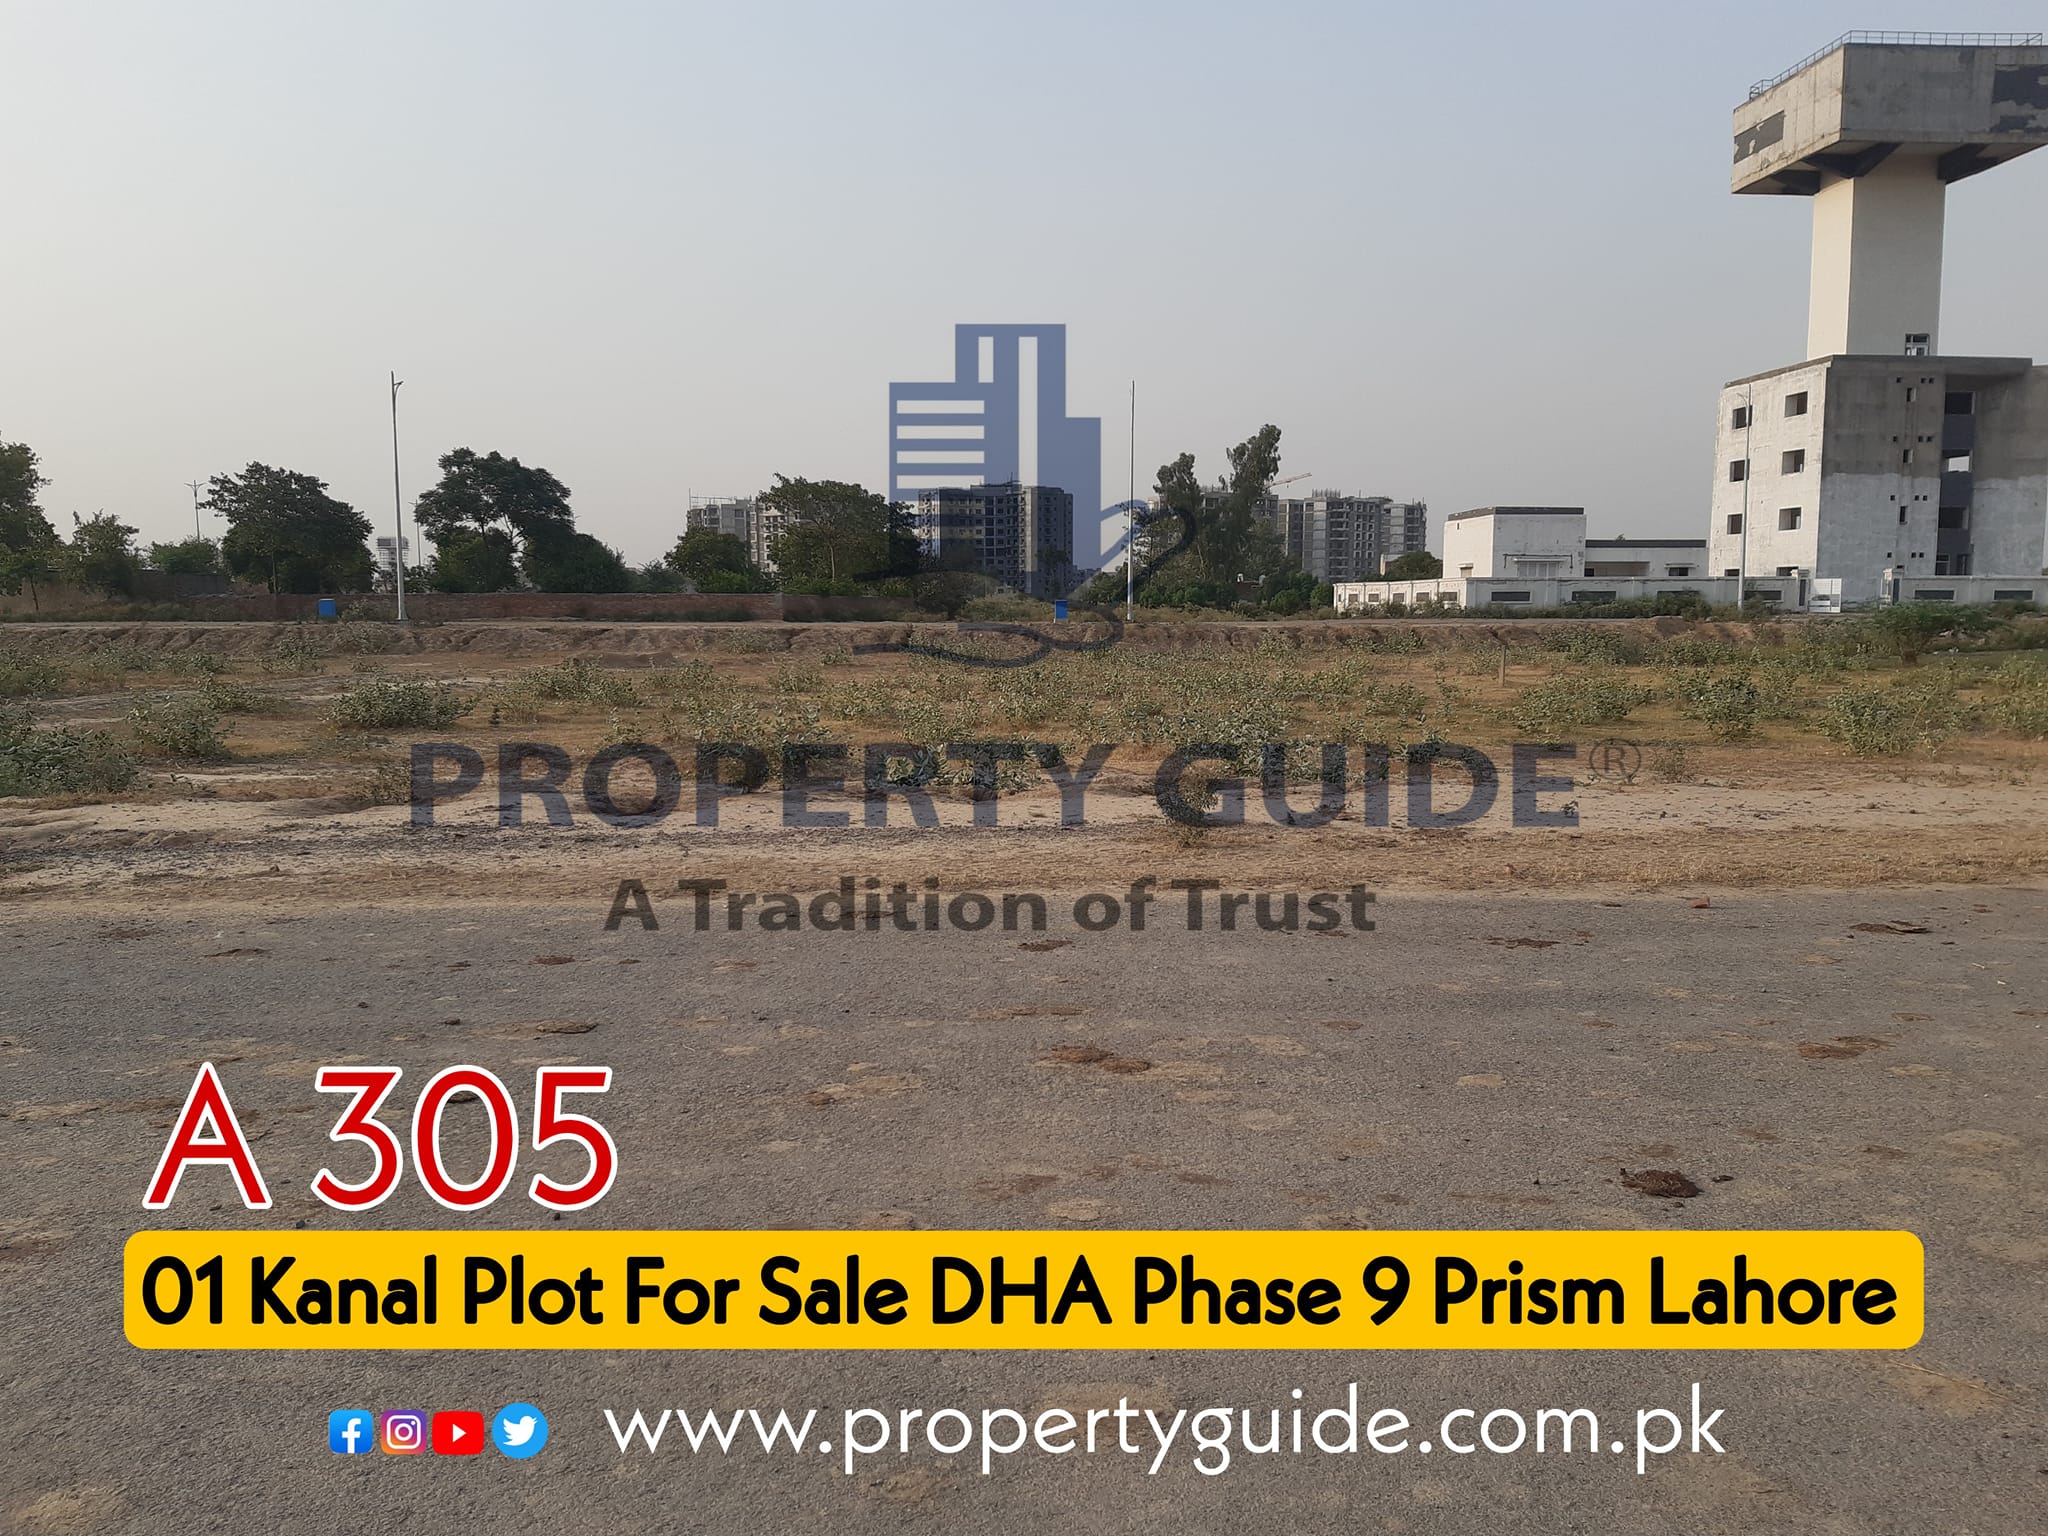 1 Kanal Plot For Sale In DHA Phase 9 Prism Lahore